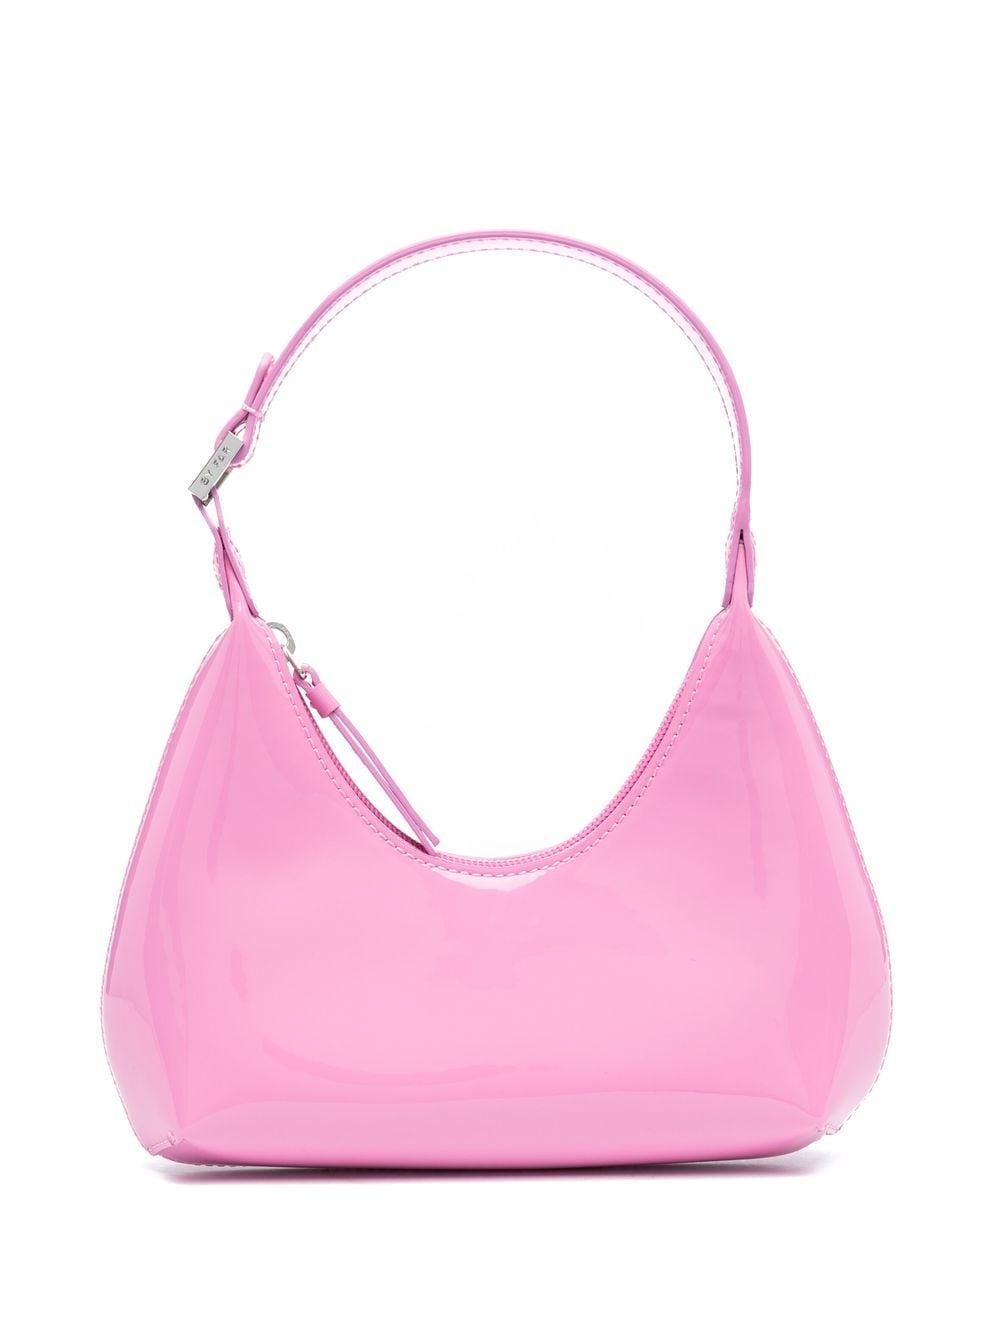 BY FAR Baby Amber Patent Leather Shoulder Bag - Farfetch